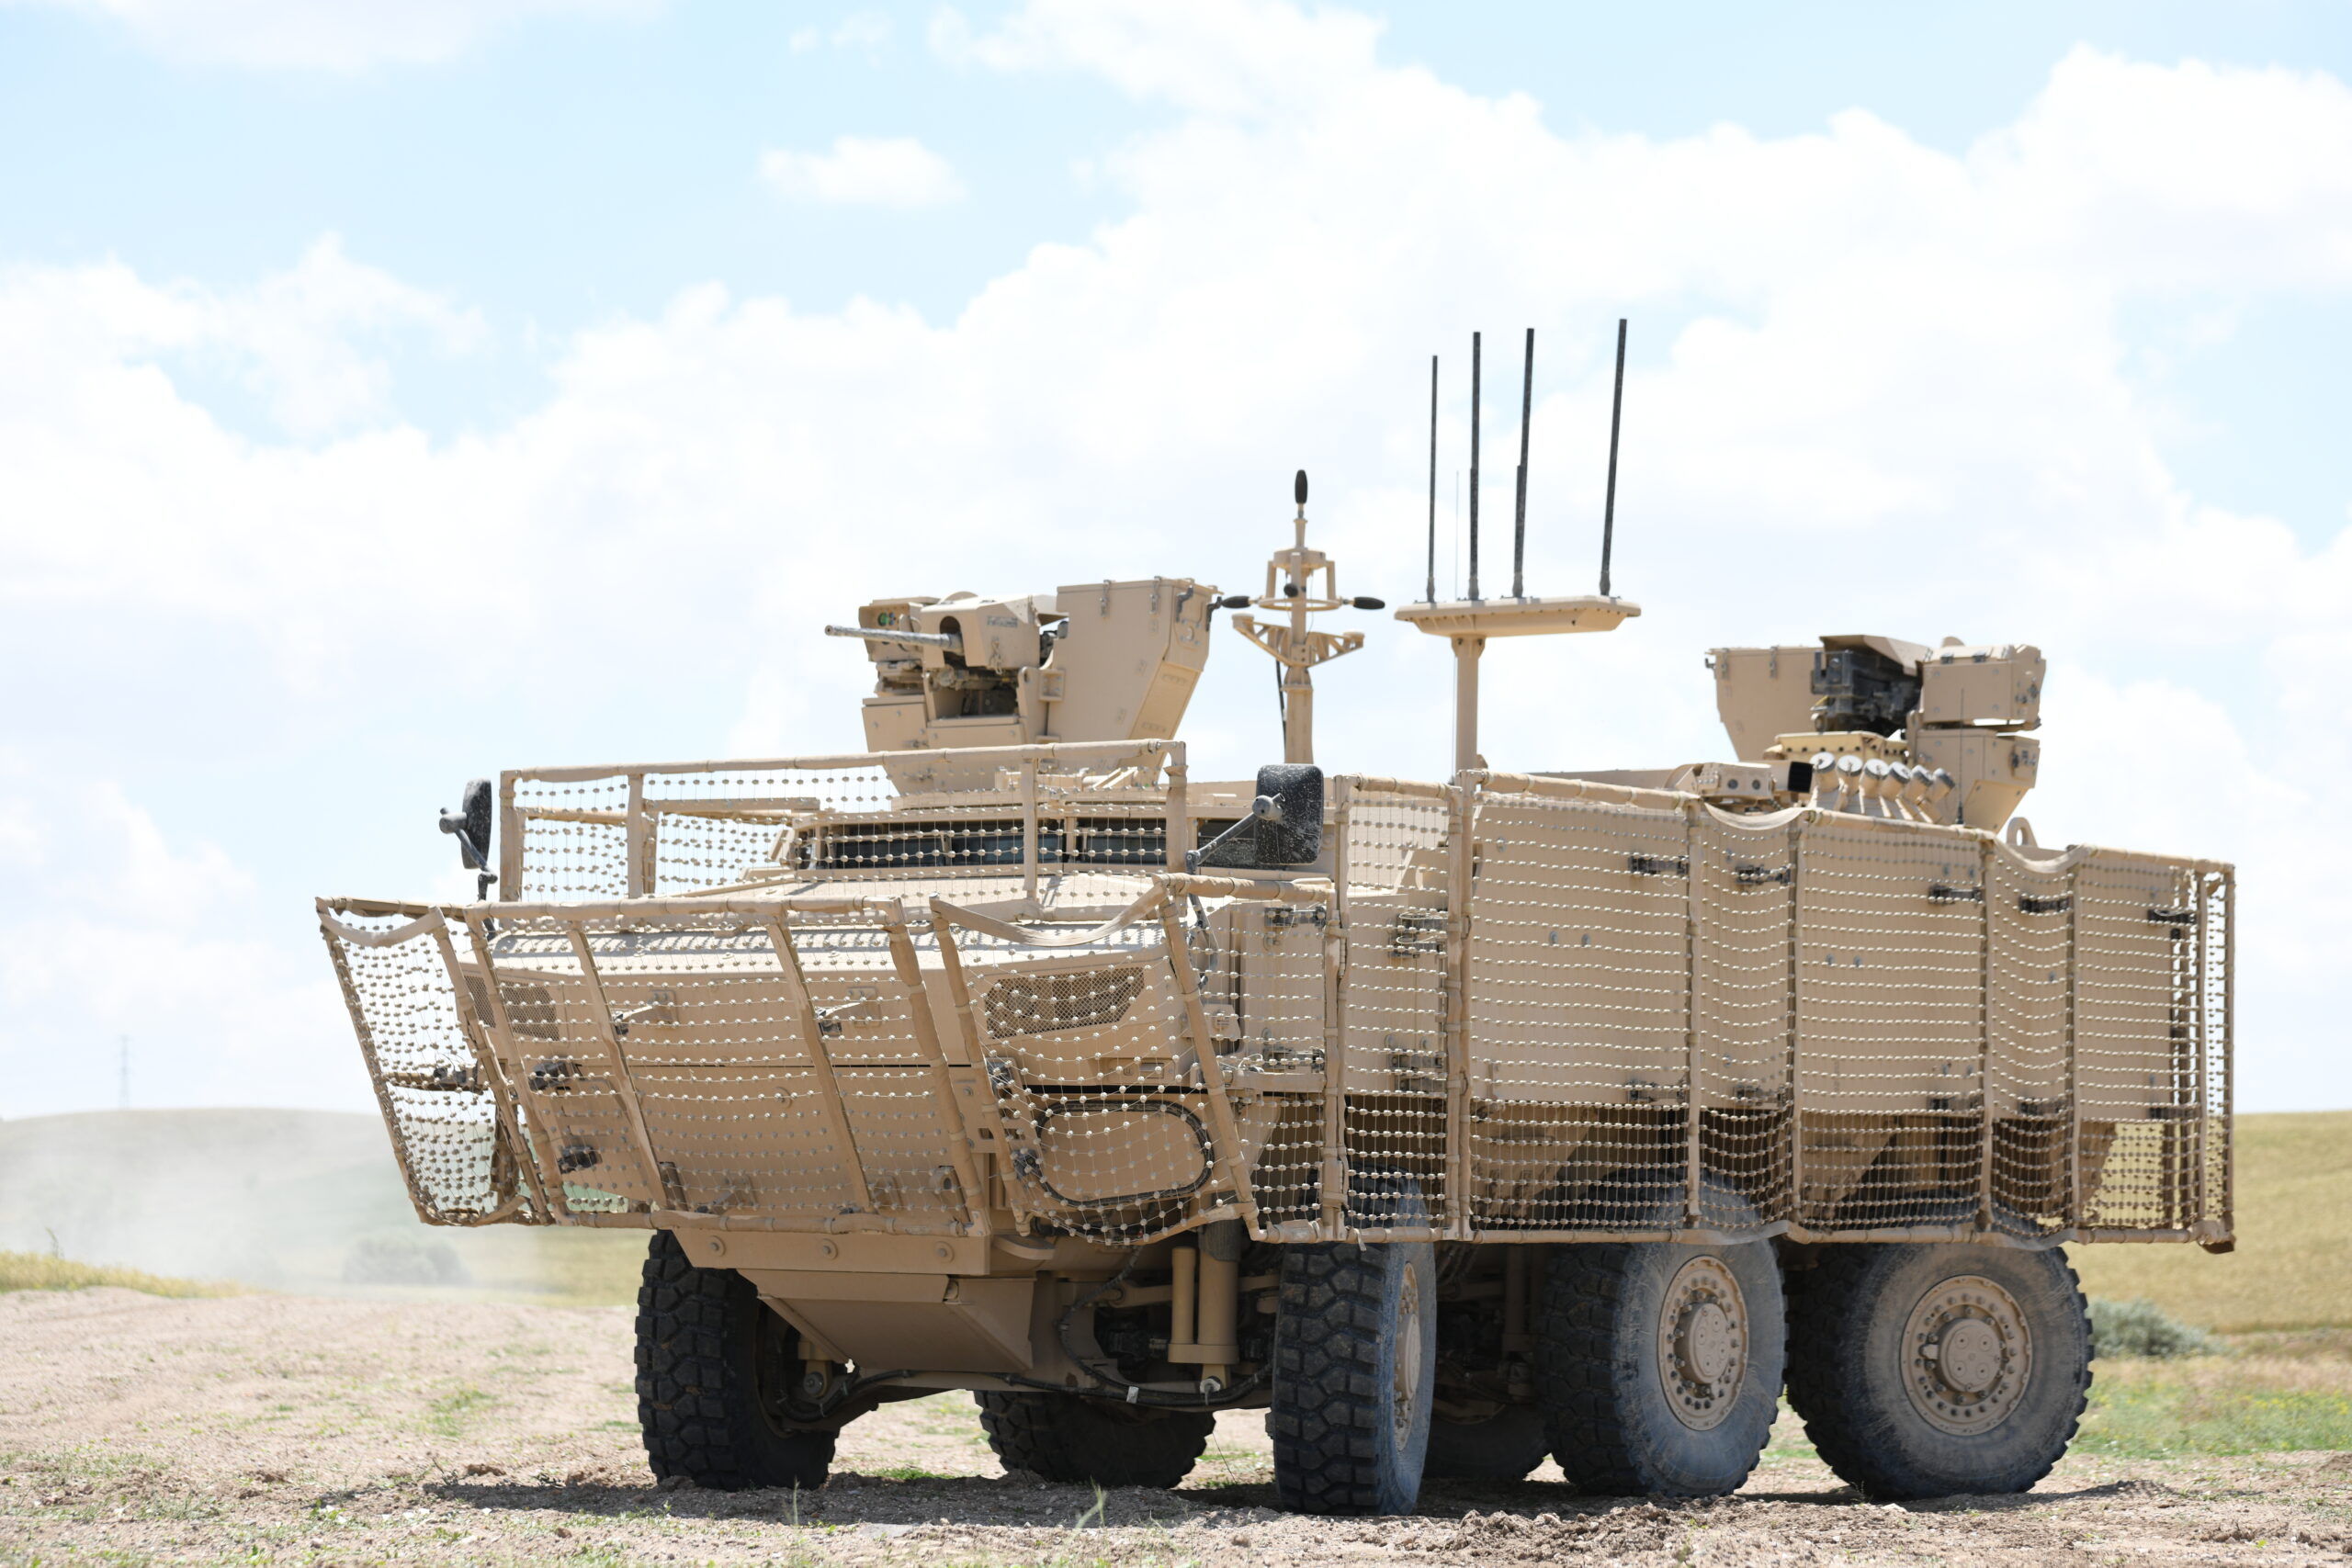 PARS IV 6x6 special operations vehicle